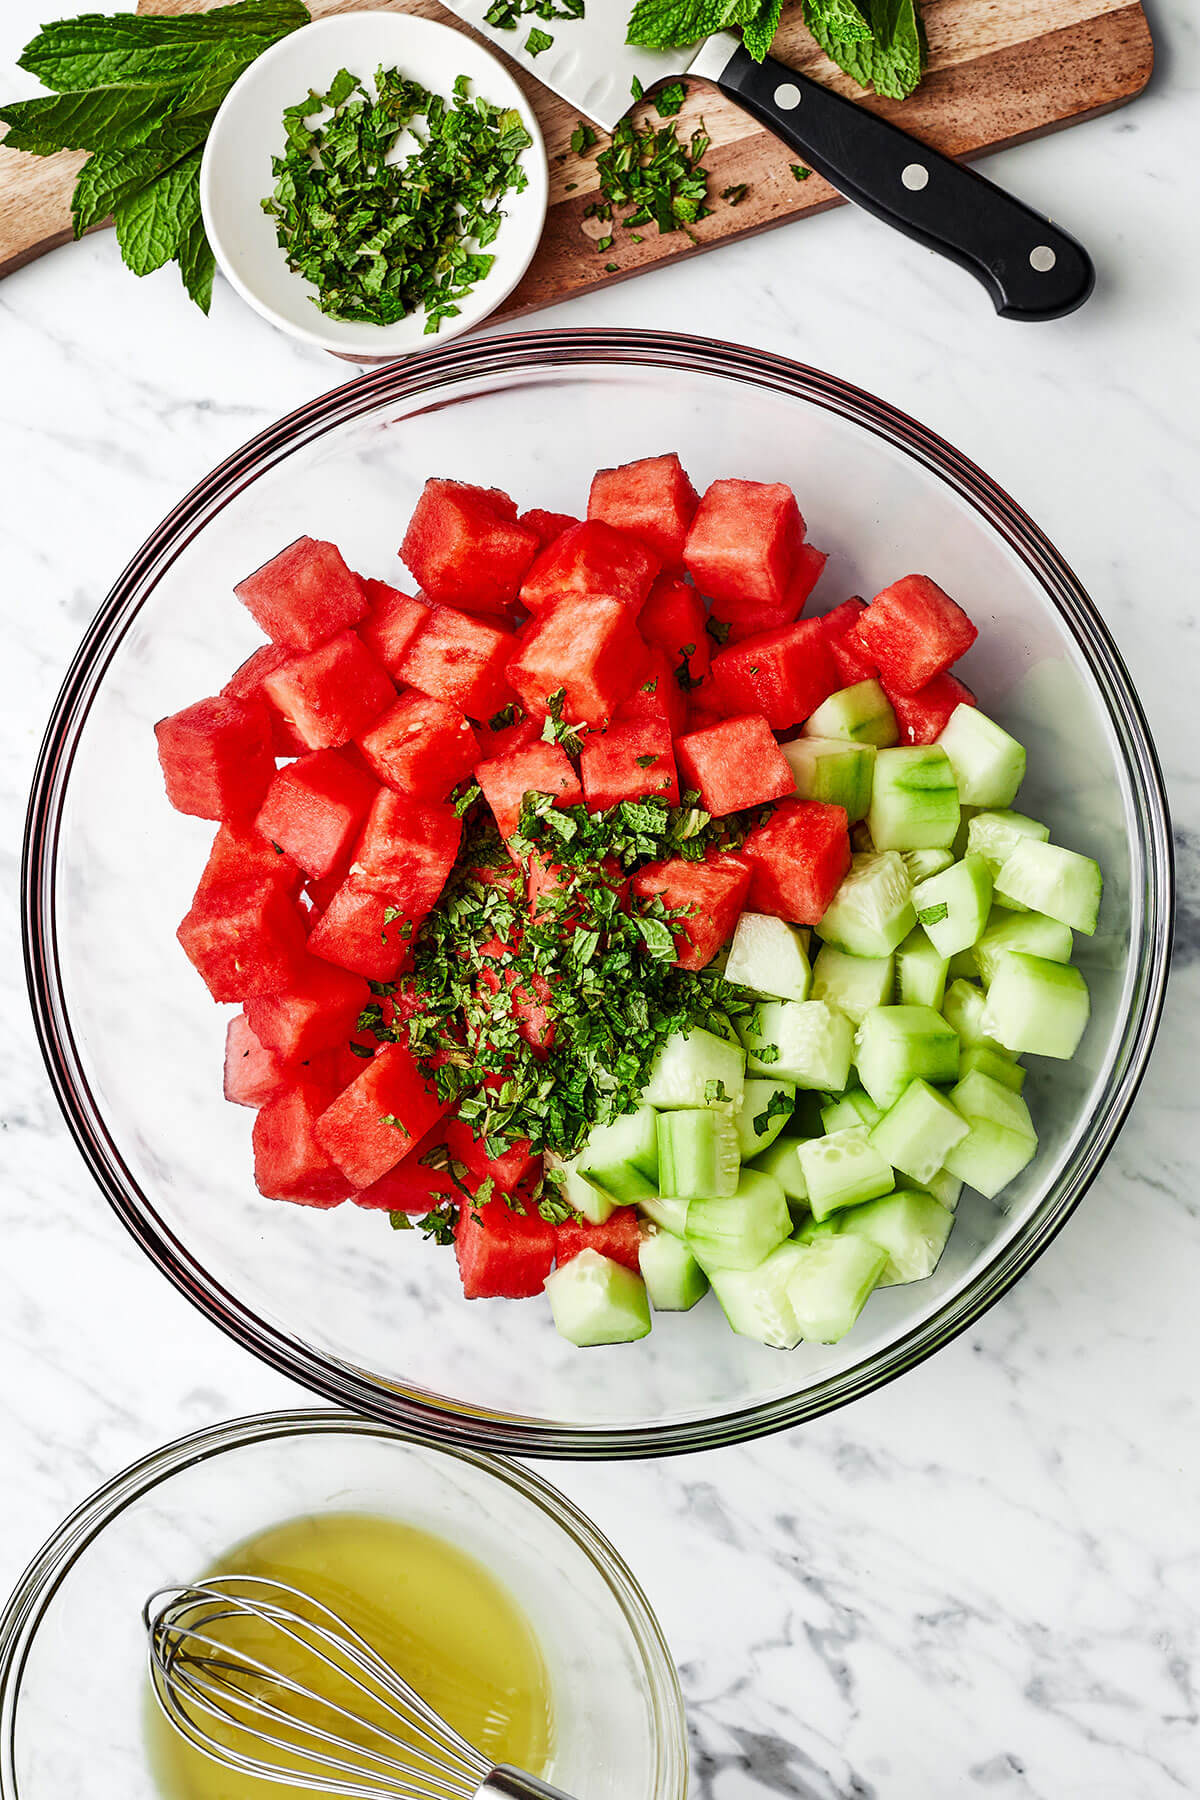 Watermelon salad ingredients in a bowl